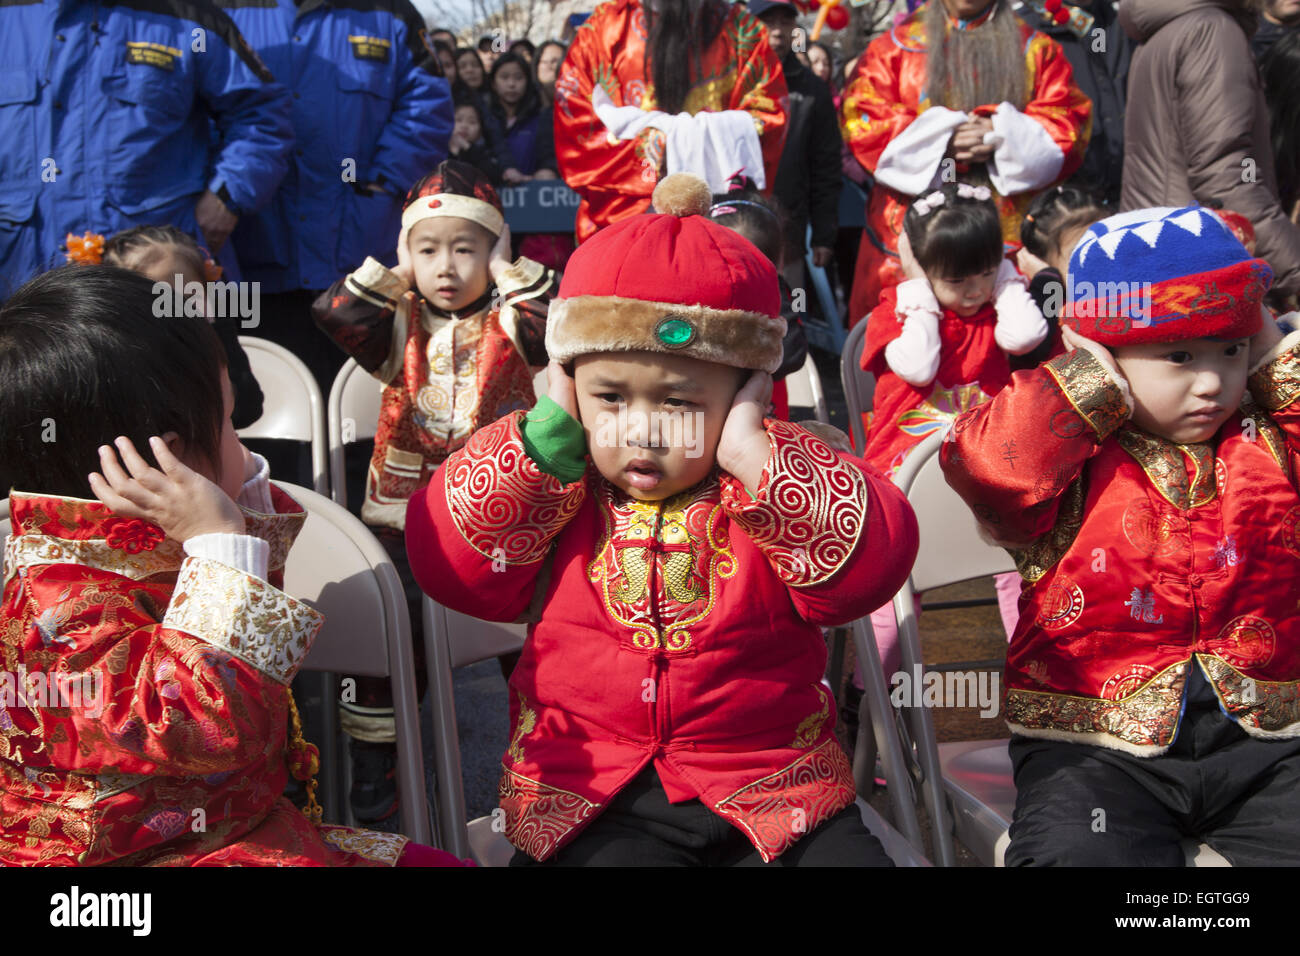 Chinese children in costumes at Chinese New Year celebration hold their ears during the very loud firecracker ceremony in the Chinatown neighborhood of Brooklyn, NY. Stock Photo